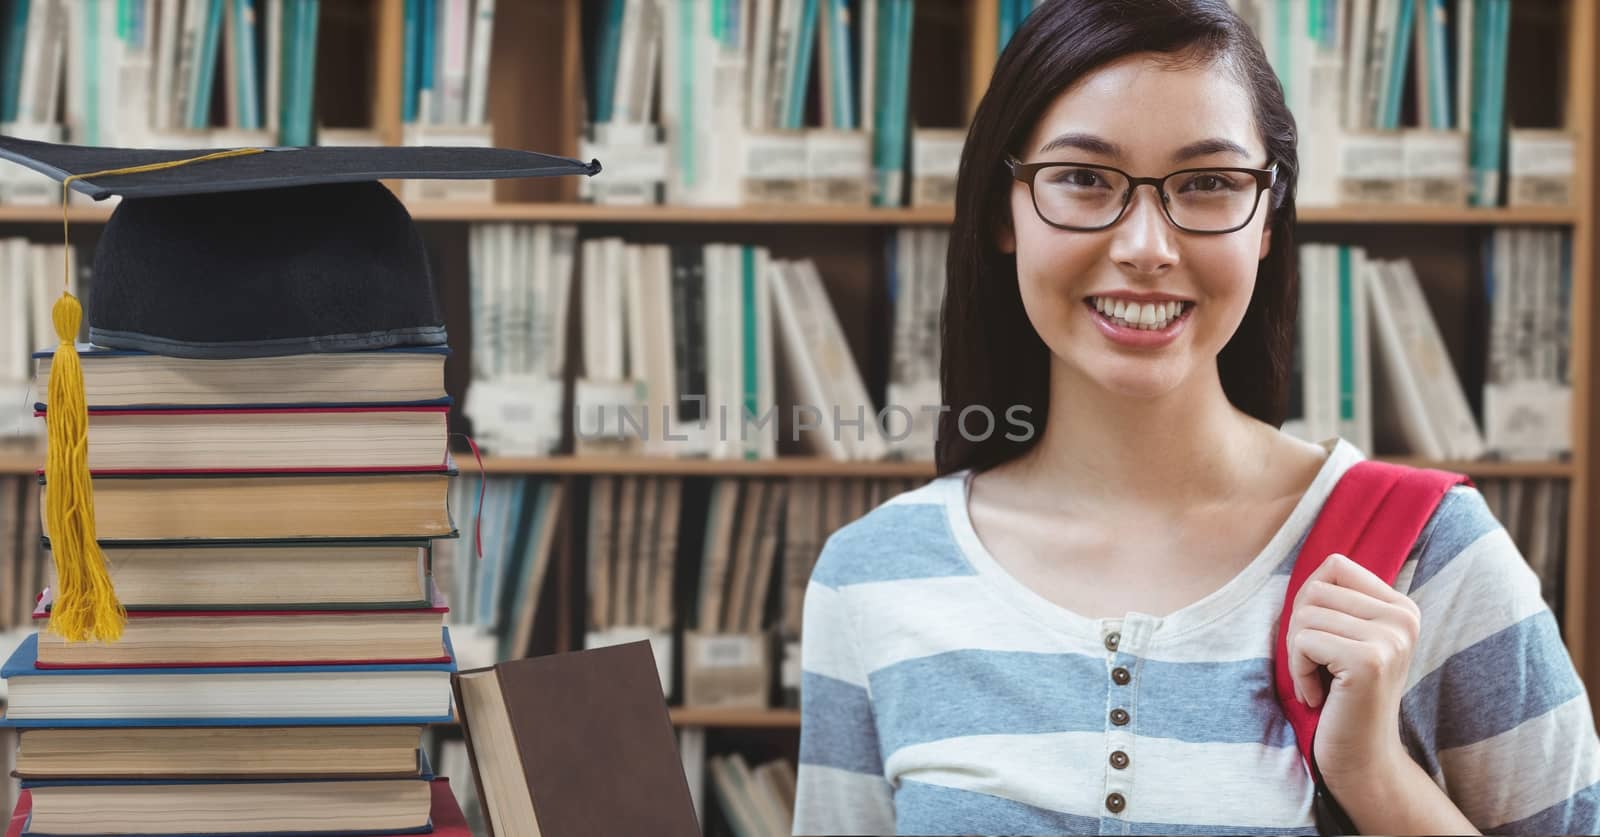 Digital composite of Student woman in education library with graduation hat and books